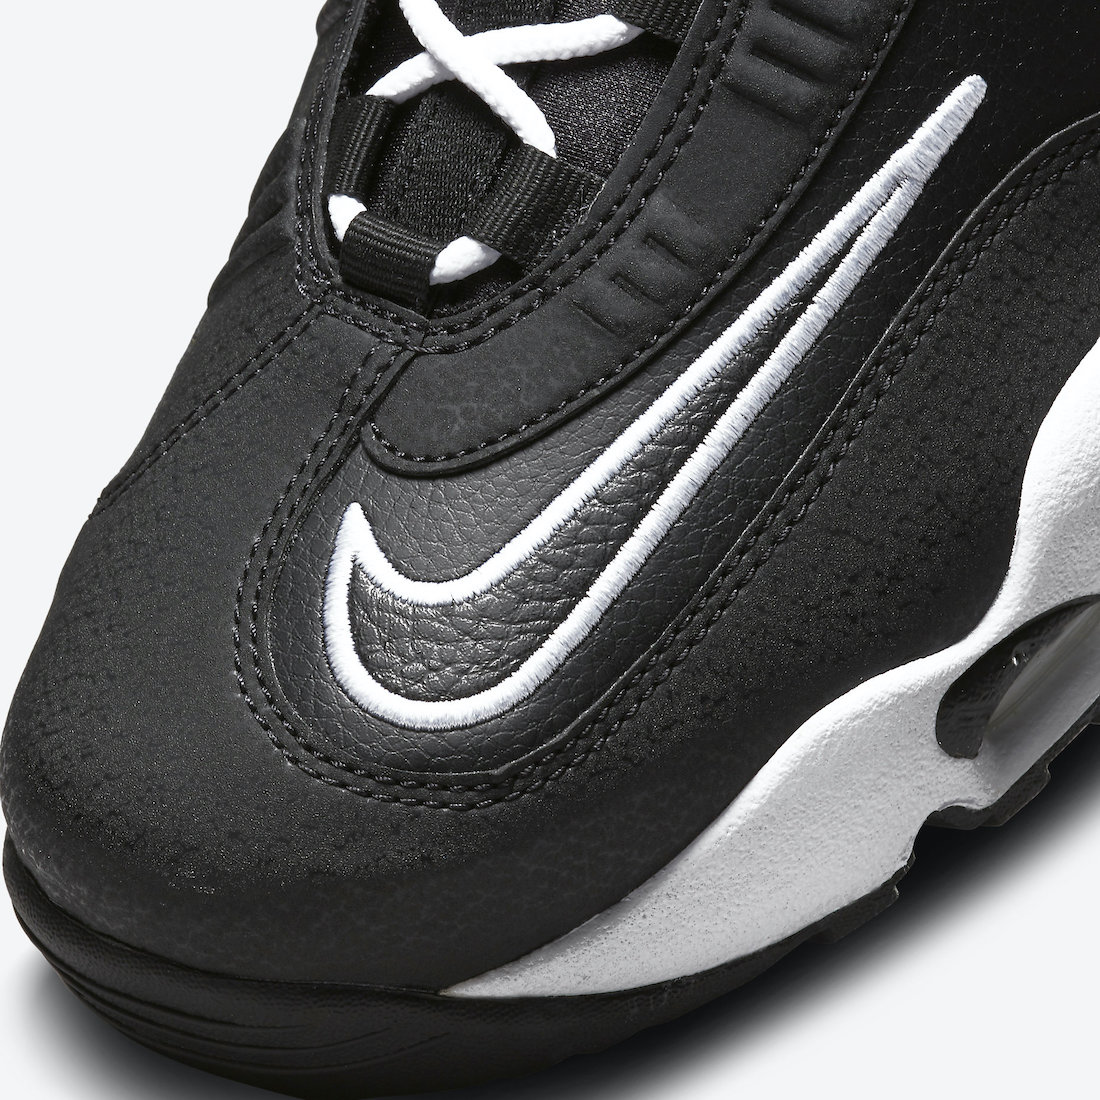 Nike-Air-Griffey-Max-1-Jackie-Robinson-DM0044-001-Release-Date-7